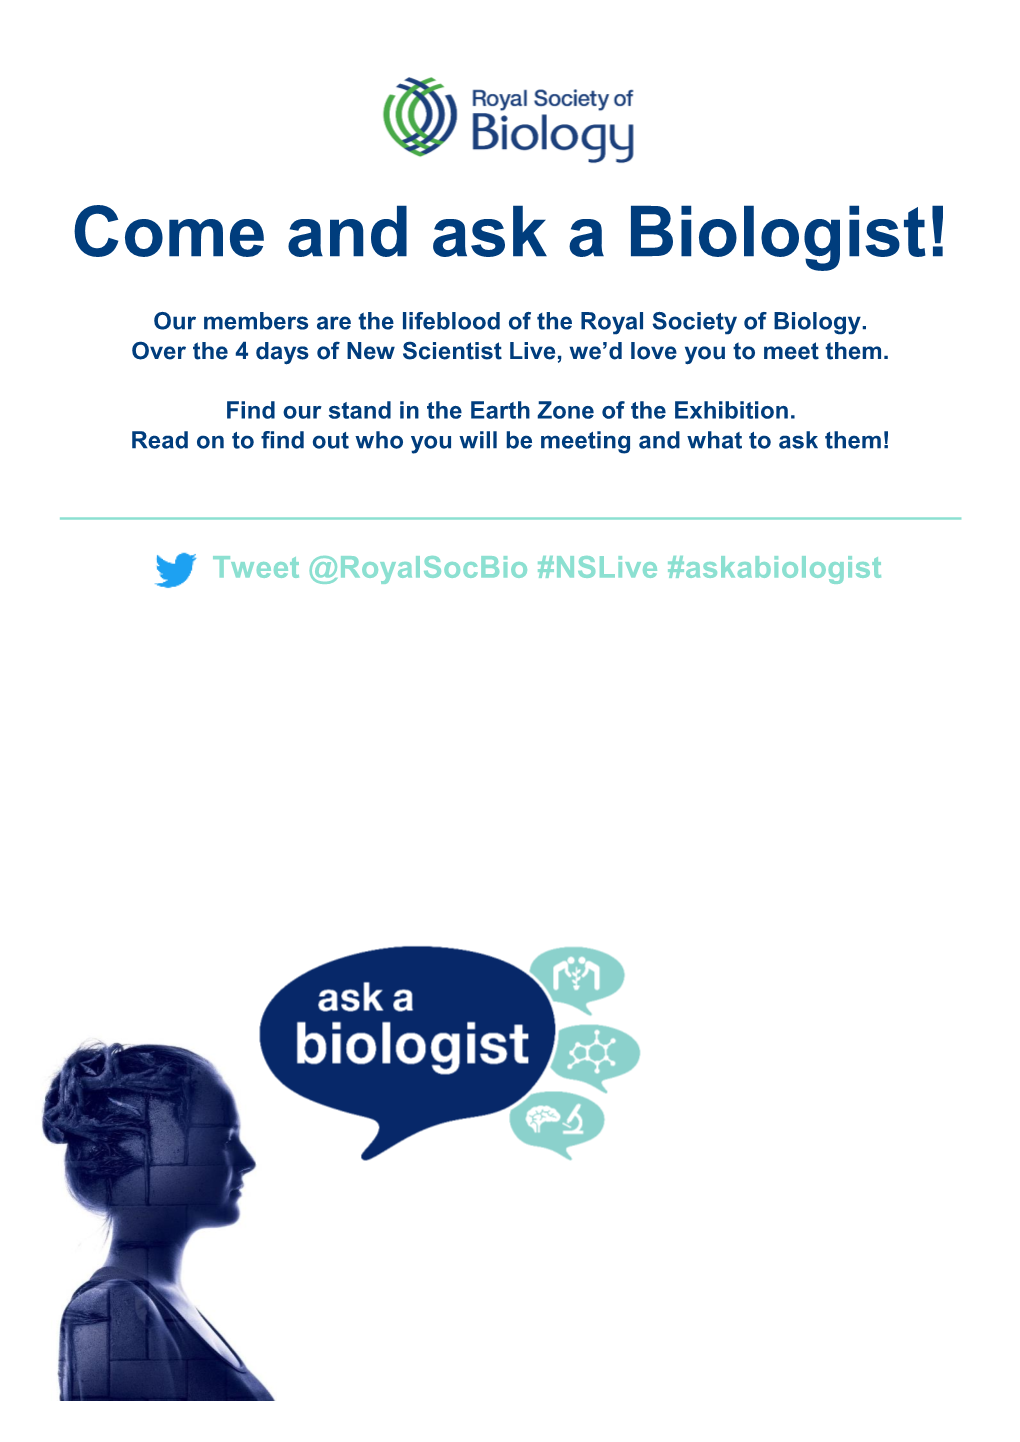 Come and Ask a Biologist!